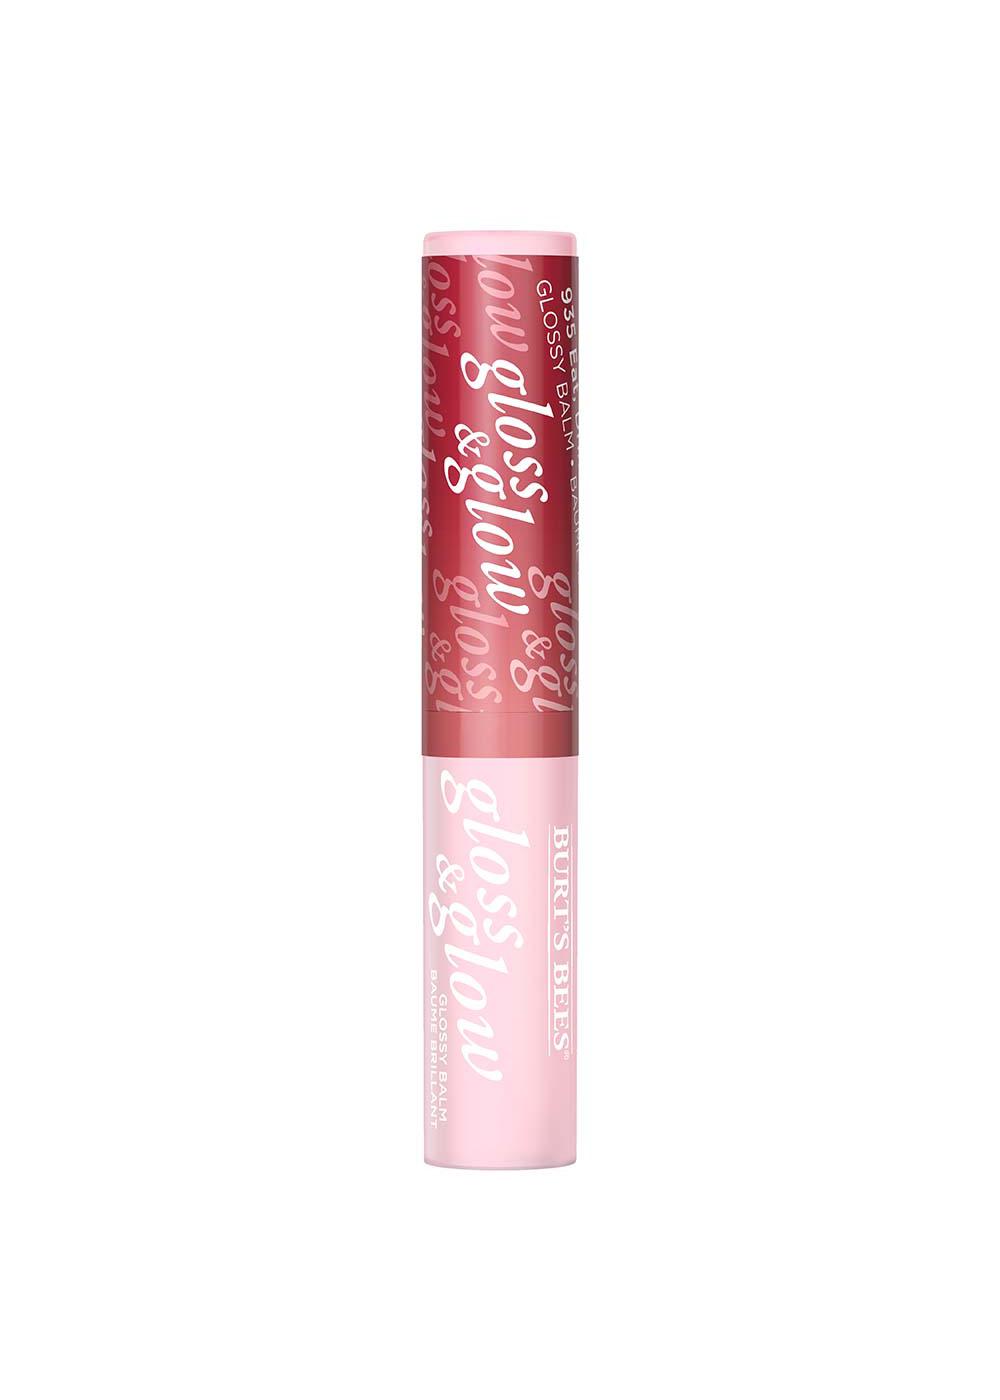 Burt's Bees Gloss and Glow Glossy Balm - Eat, Drink and Be Cherry; image 1 of 3